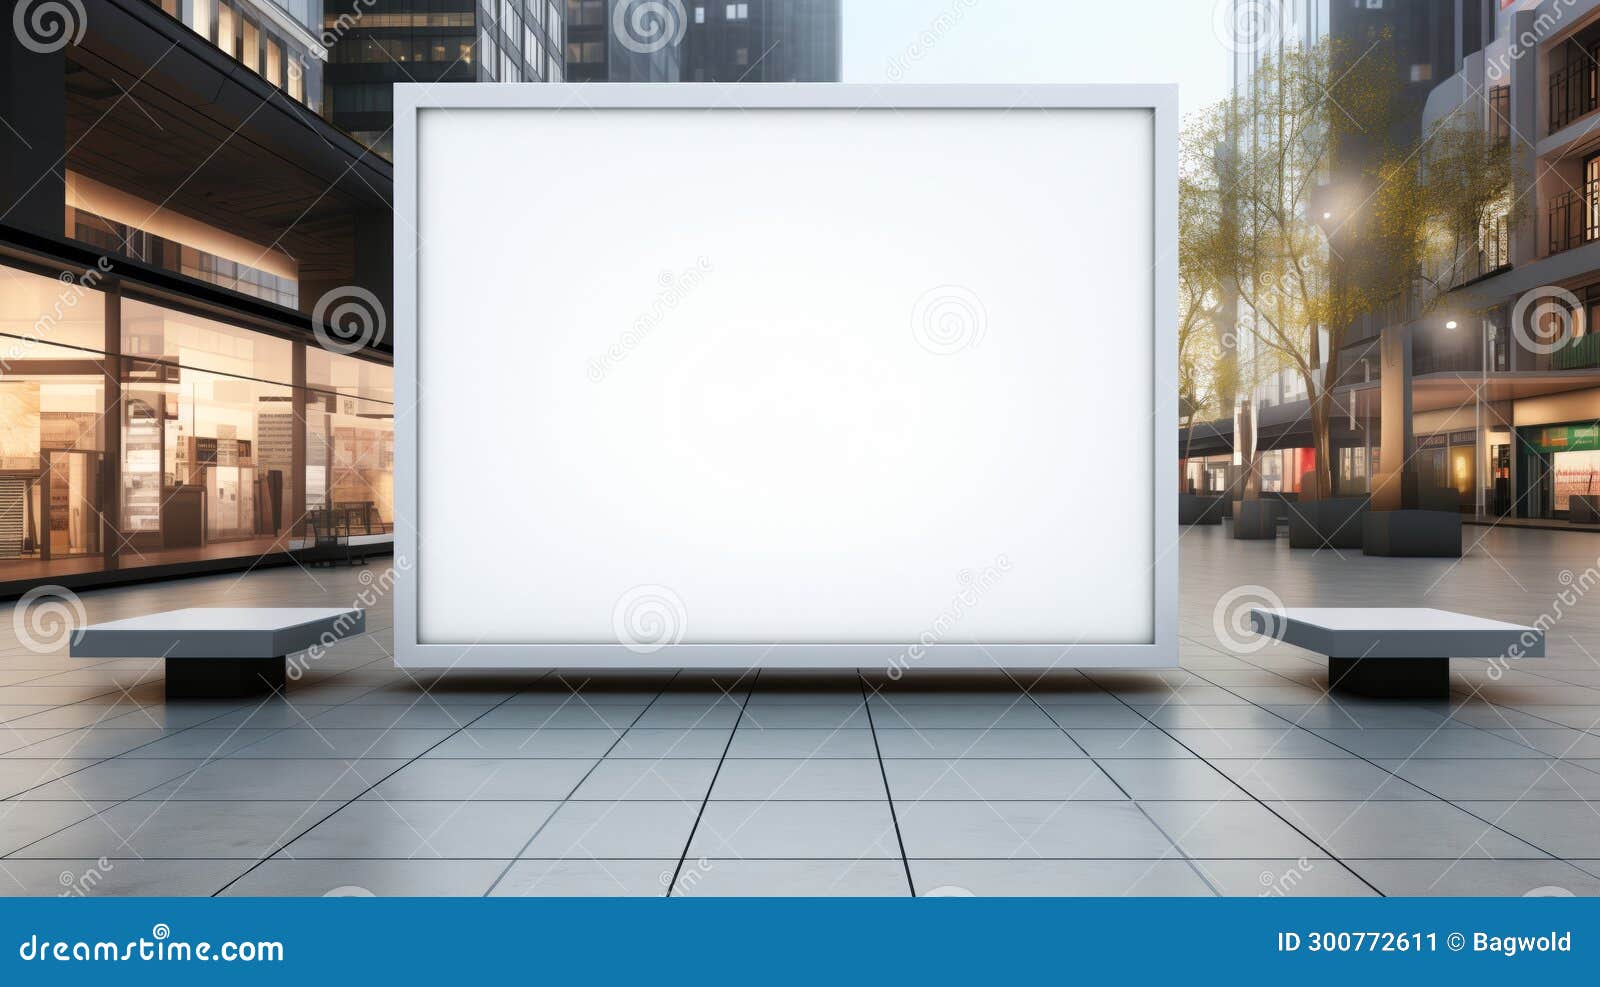 blank iluminated information sign in city street - copy space for text or images